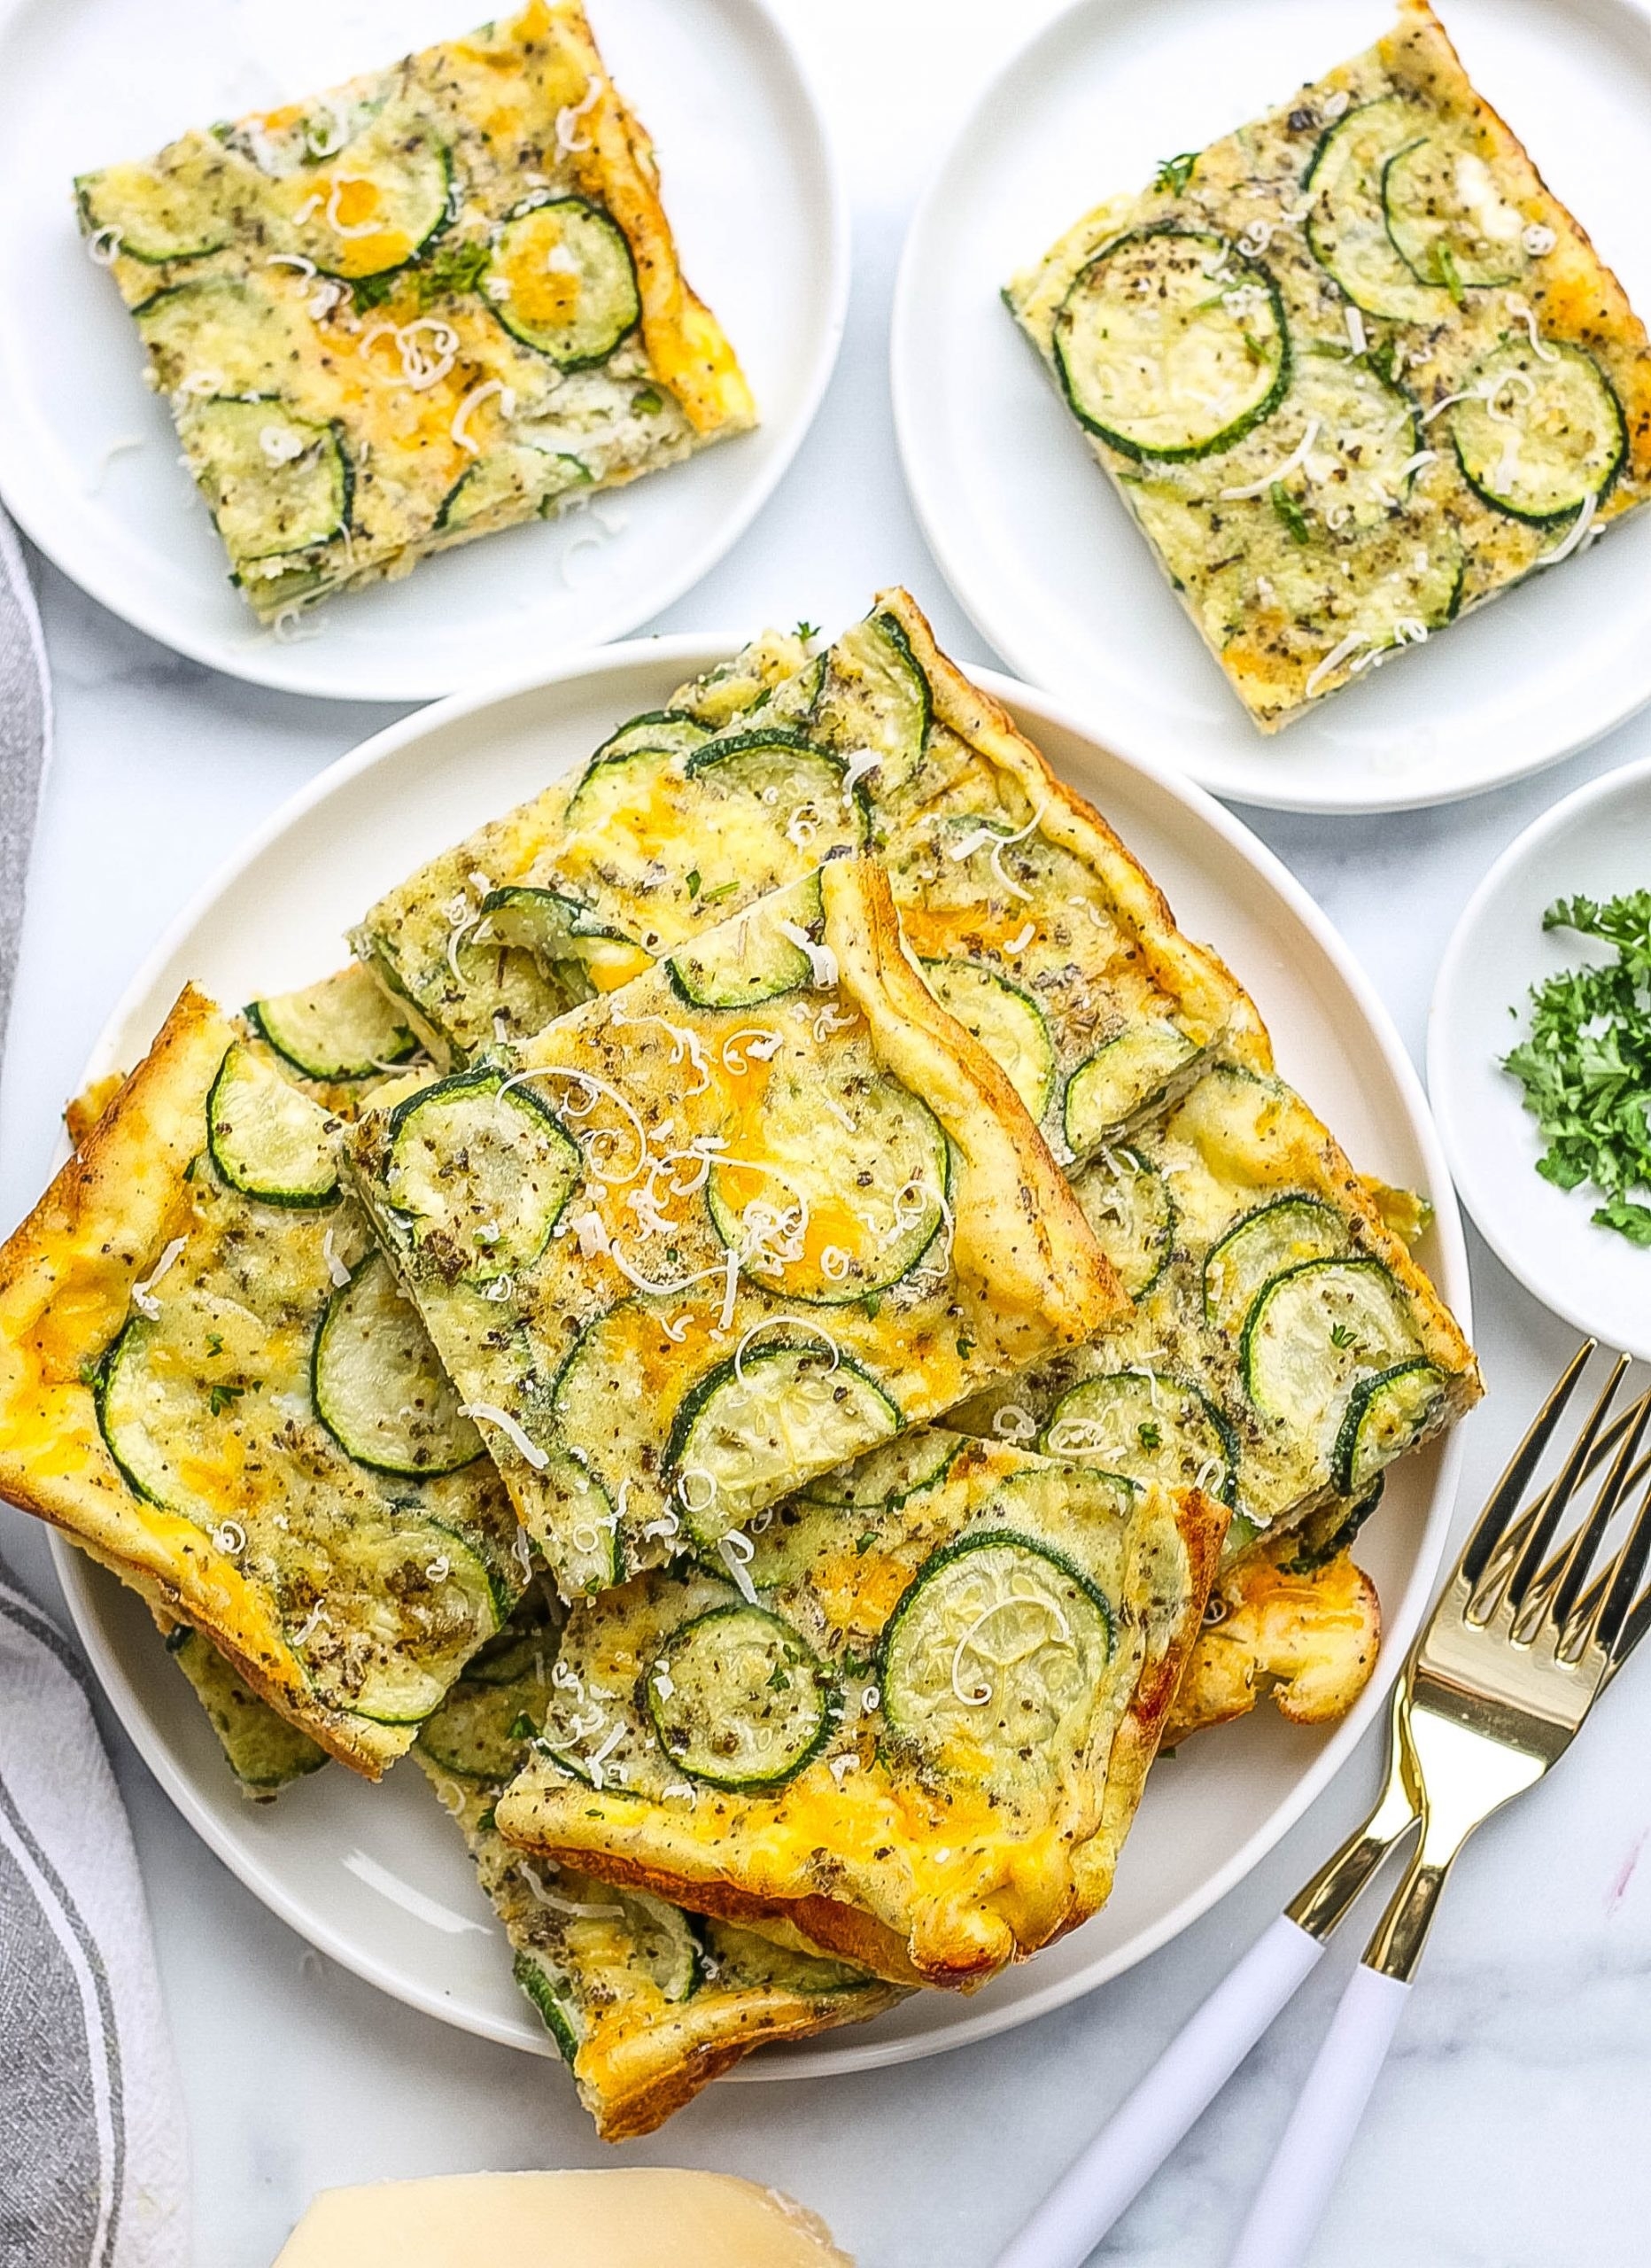 Zucchini frittata squares on a white plate next to forks